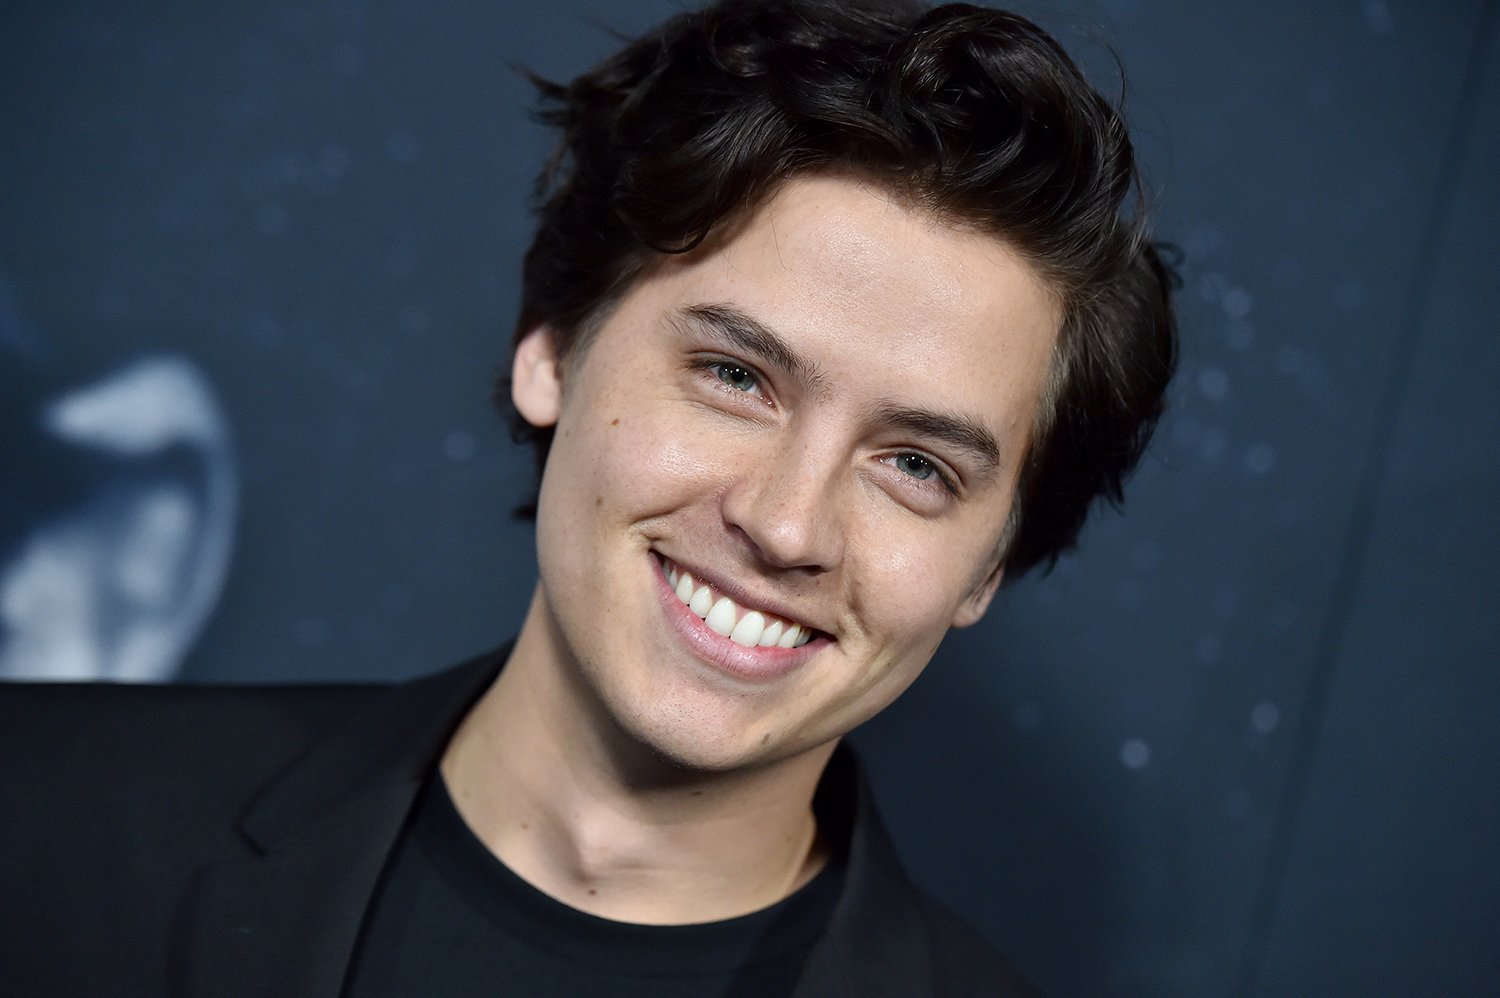 Riverdale star Cole Sprouse at the premiere of A24's Uncut Gems